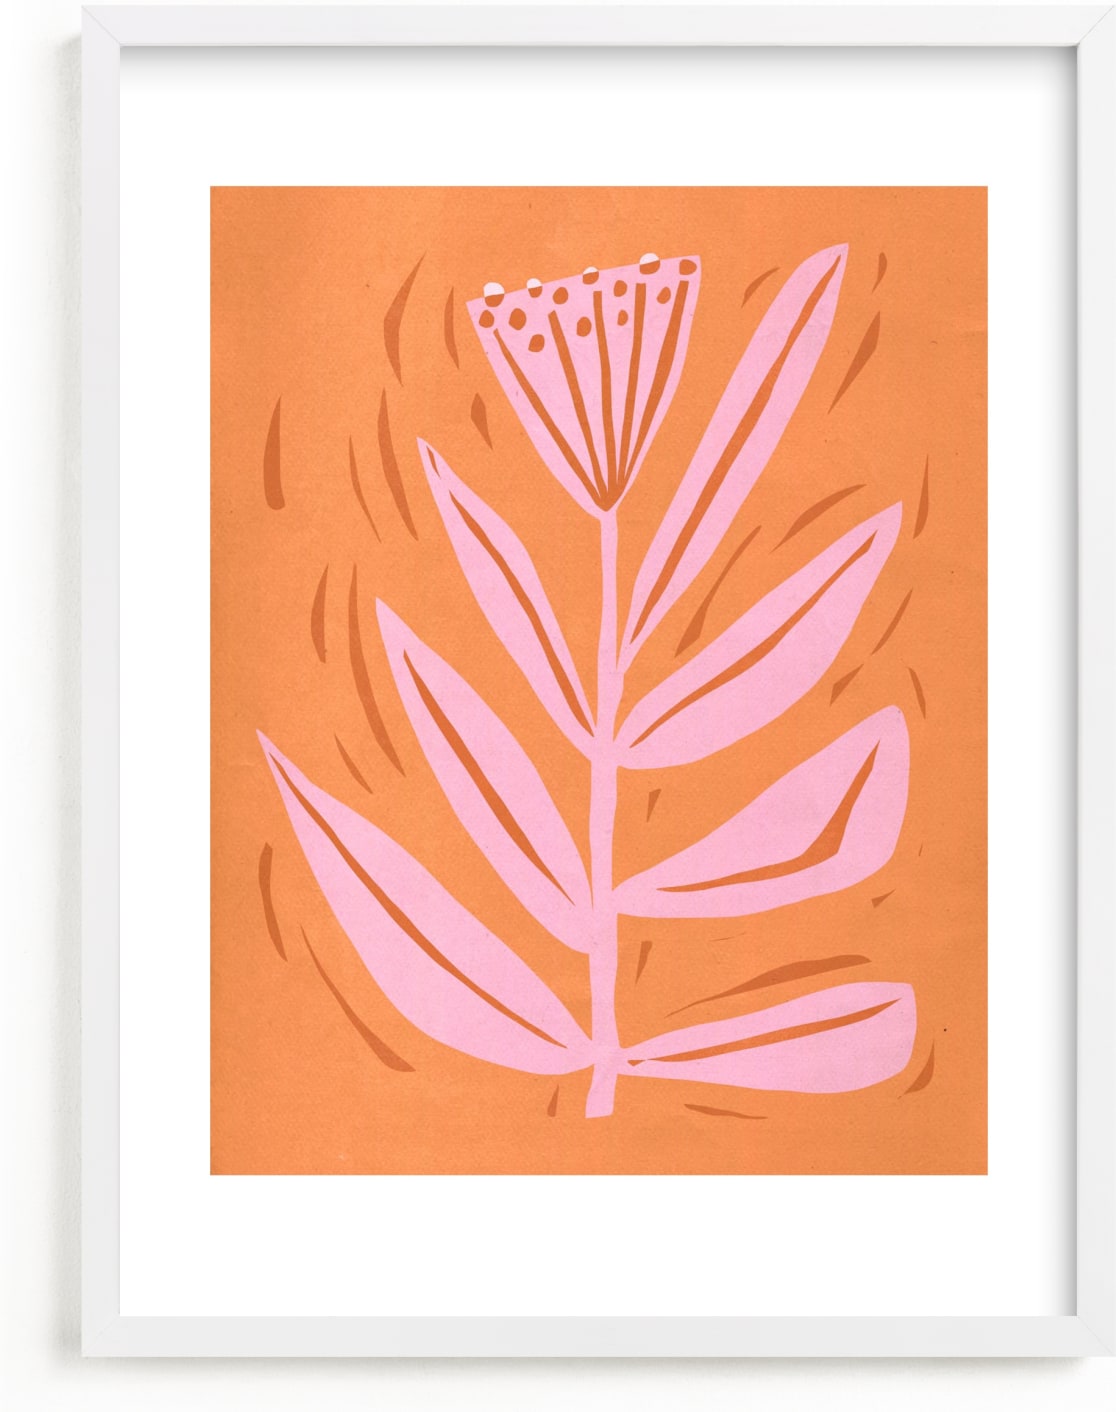 This is a pink kids wall art by Brandie Stonge called Tall Flower.